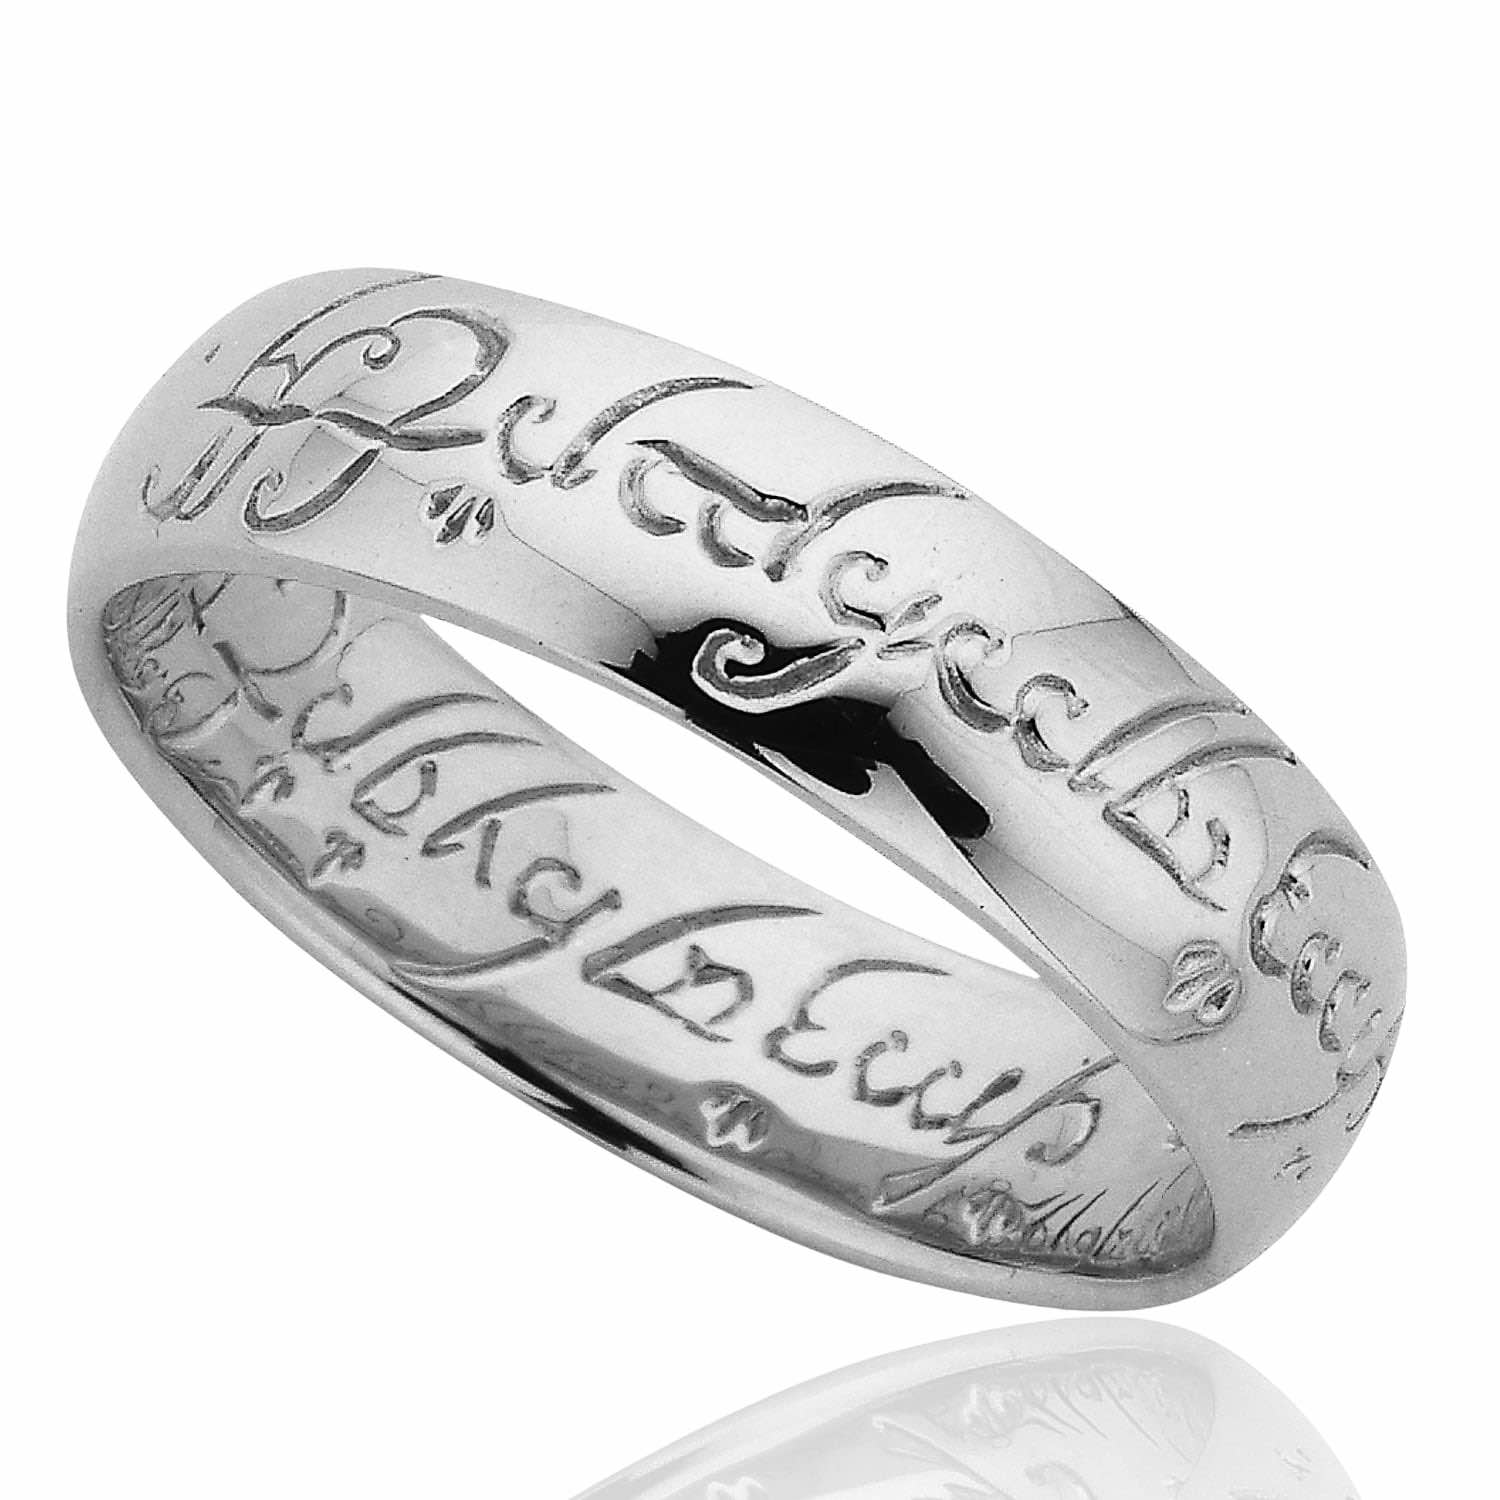 The One Ring is a  magical ring that was created by the Dark Lord Sauron to enslave the inhabitants of Middle-earth and bring them under his control. 